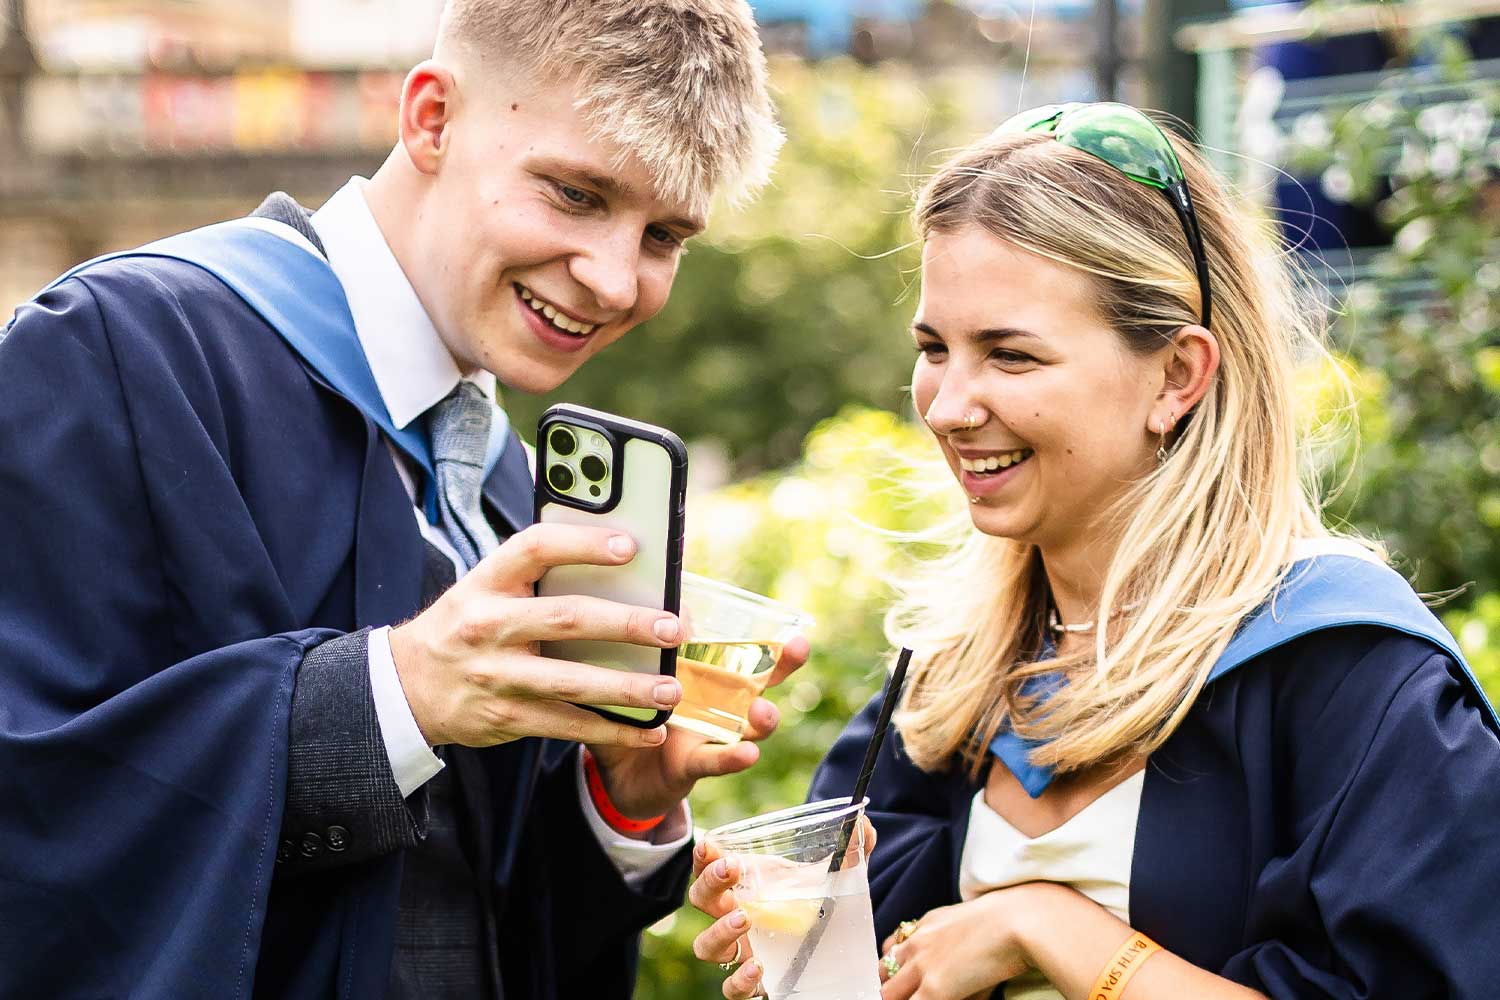 Two graduates holding drinks in plastic cups look at an iPhone